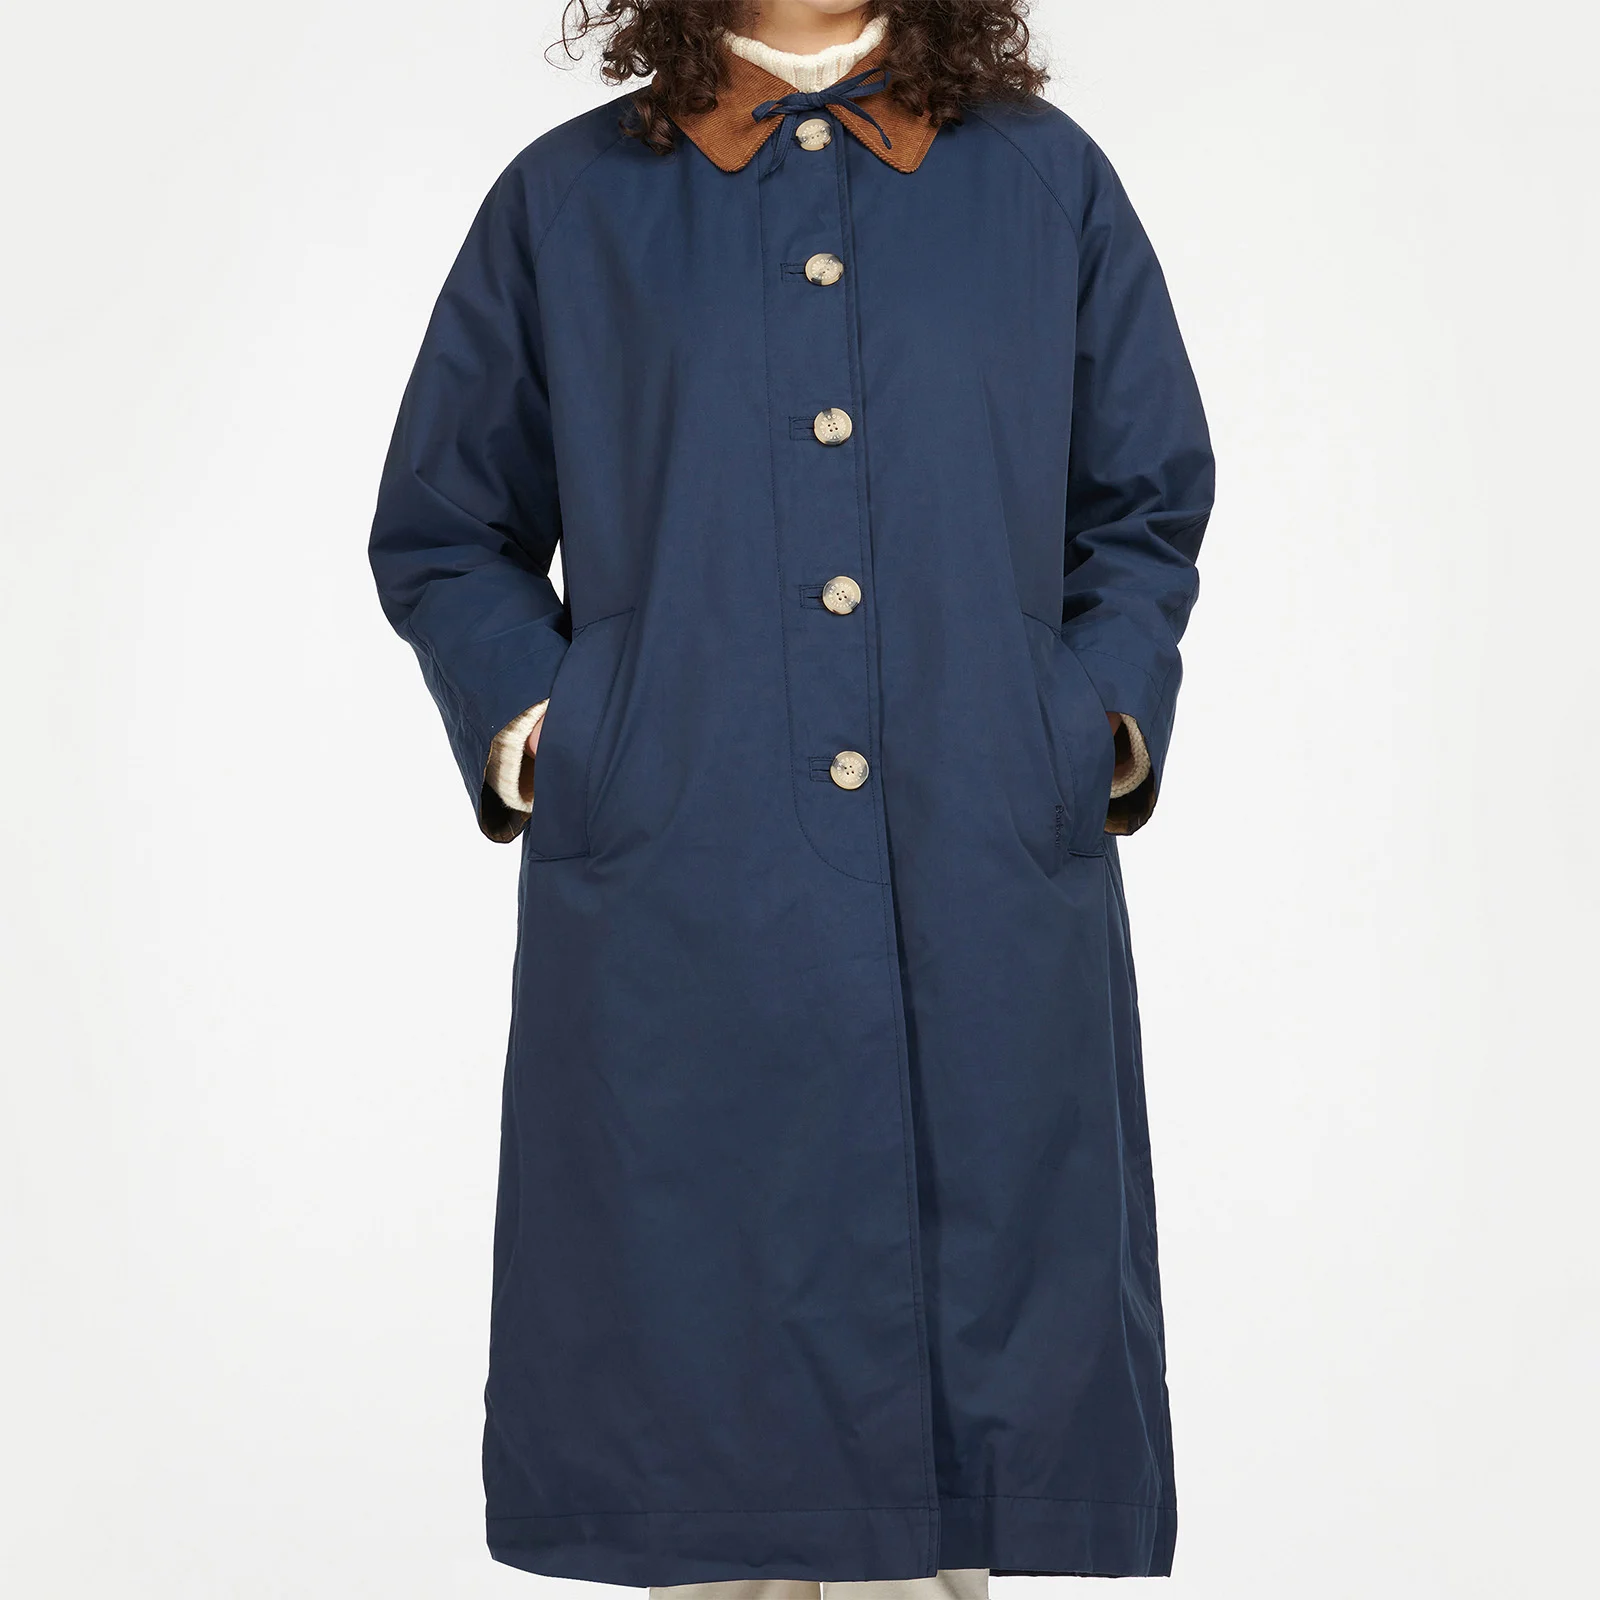 Barbour X ALEXACHUNG Women's Jackie Casual Jacket - Royal Navy/Muted Image 1